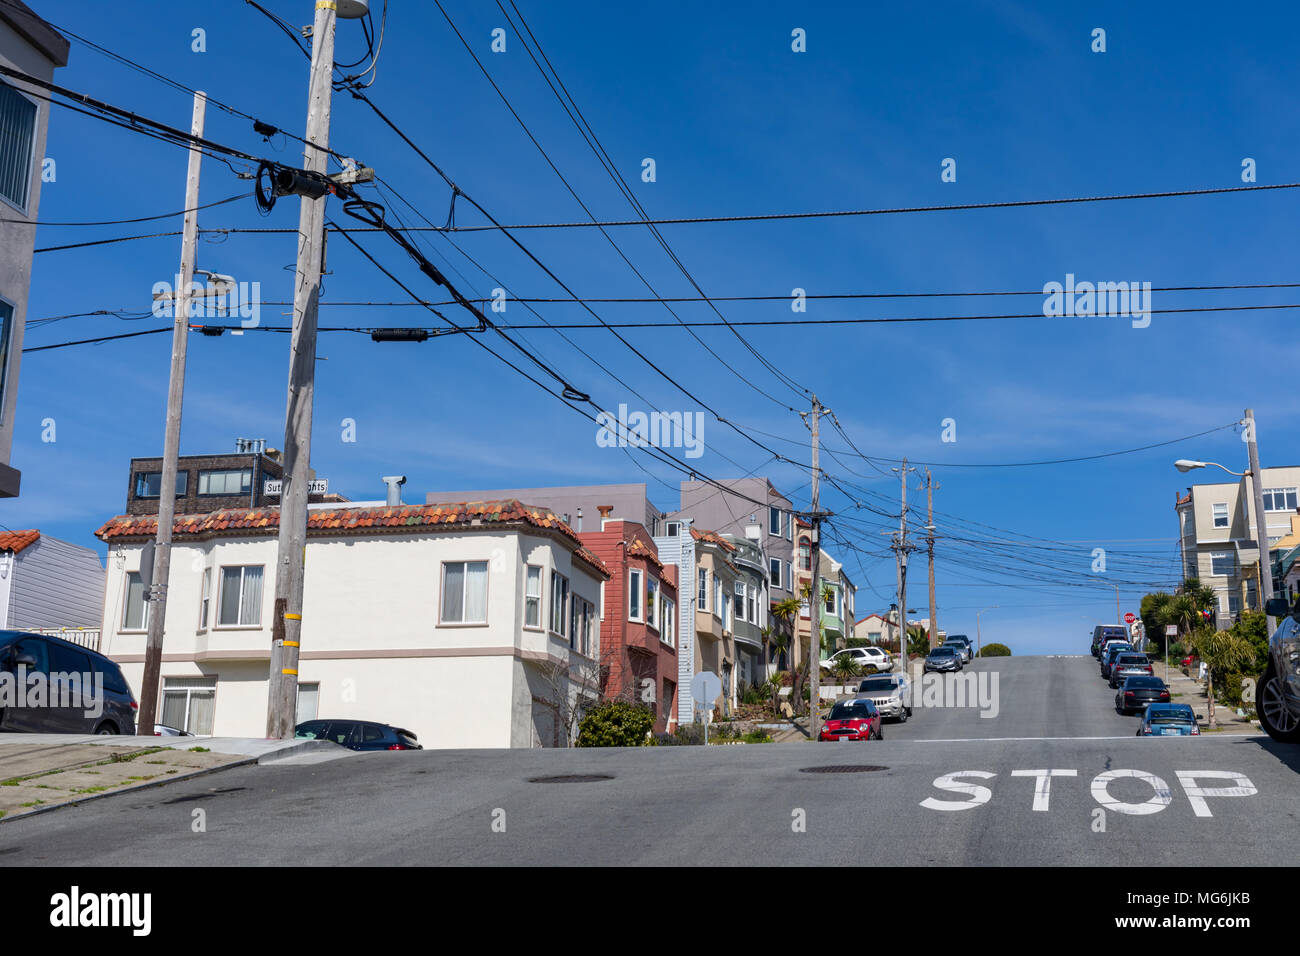 Steile Wohnstraße in San Francisco, 47th Ave, Sutro Heights Ave Stockfoto